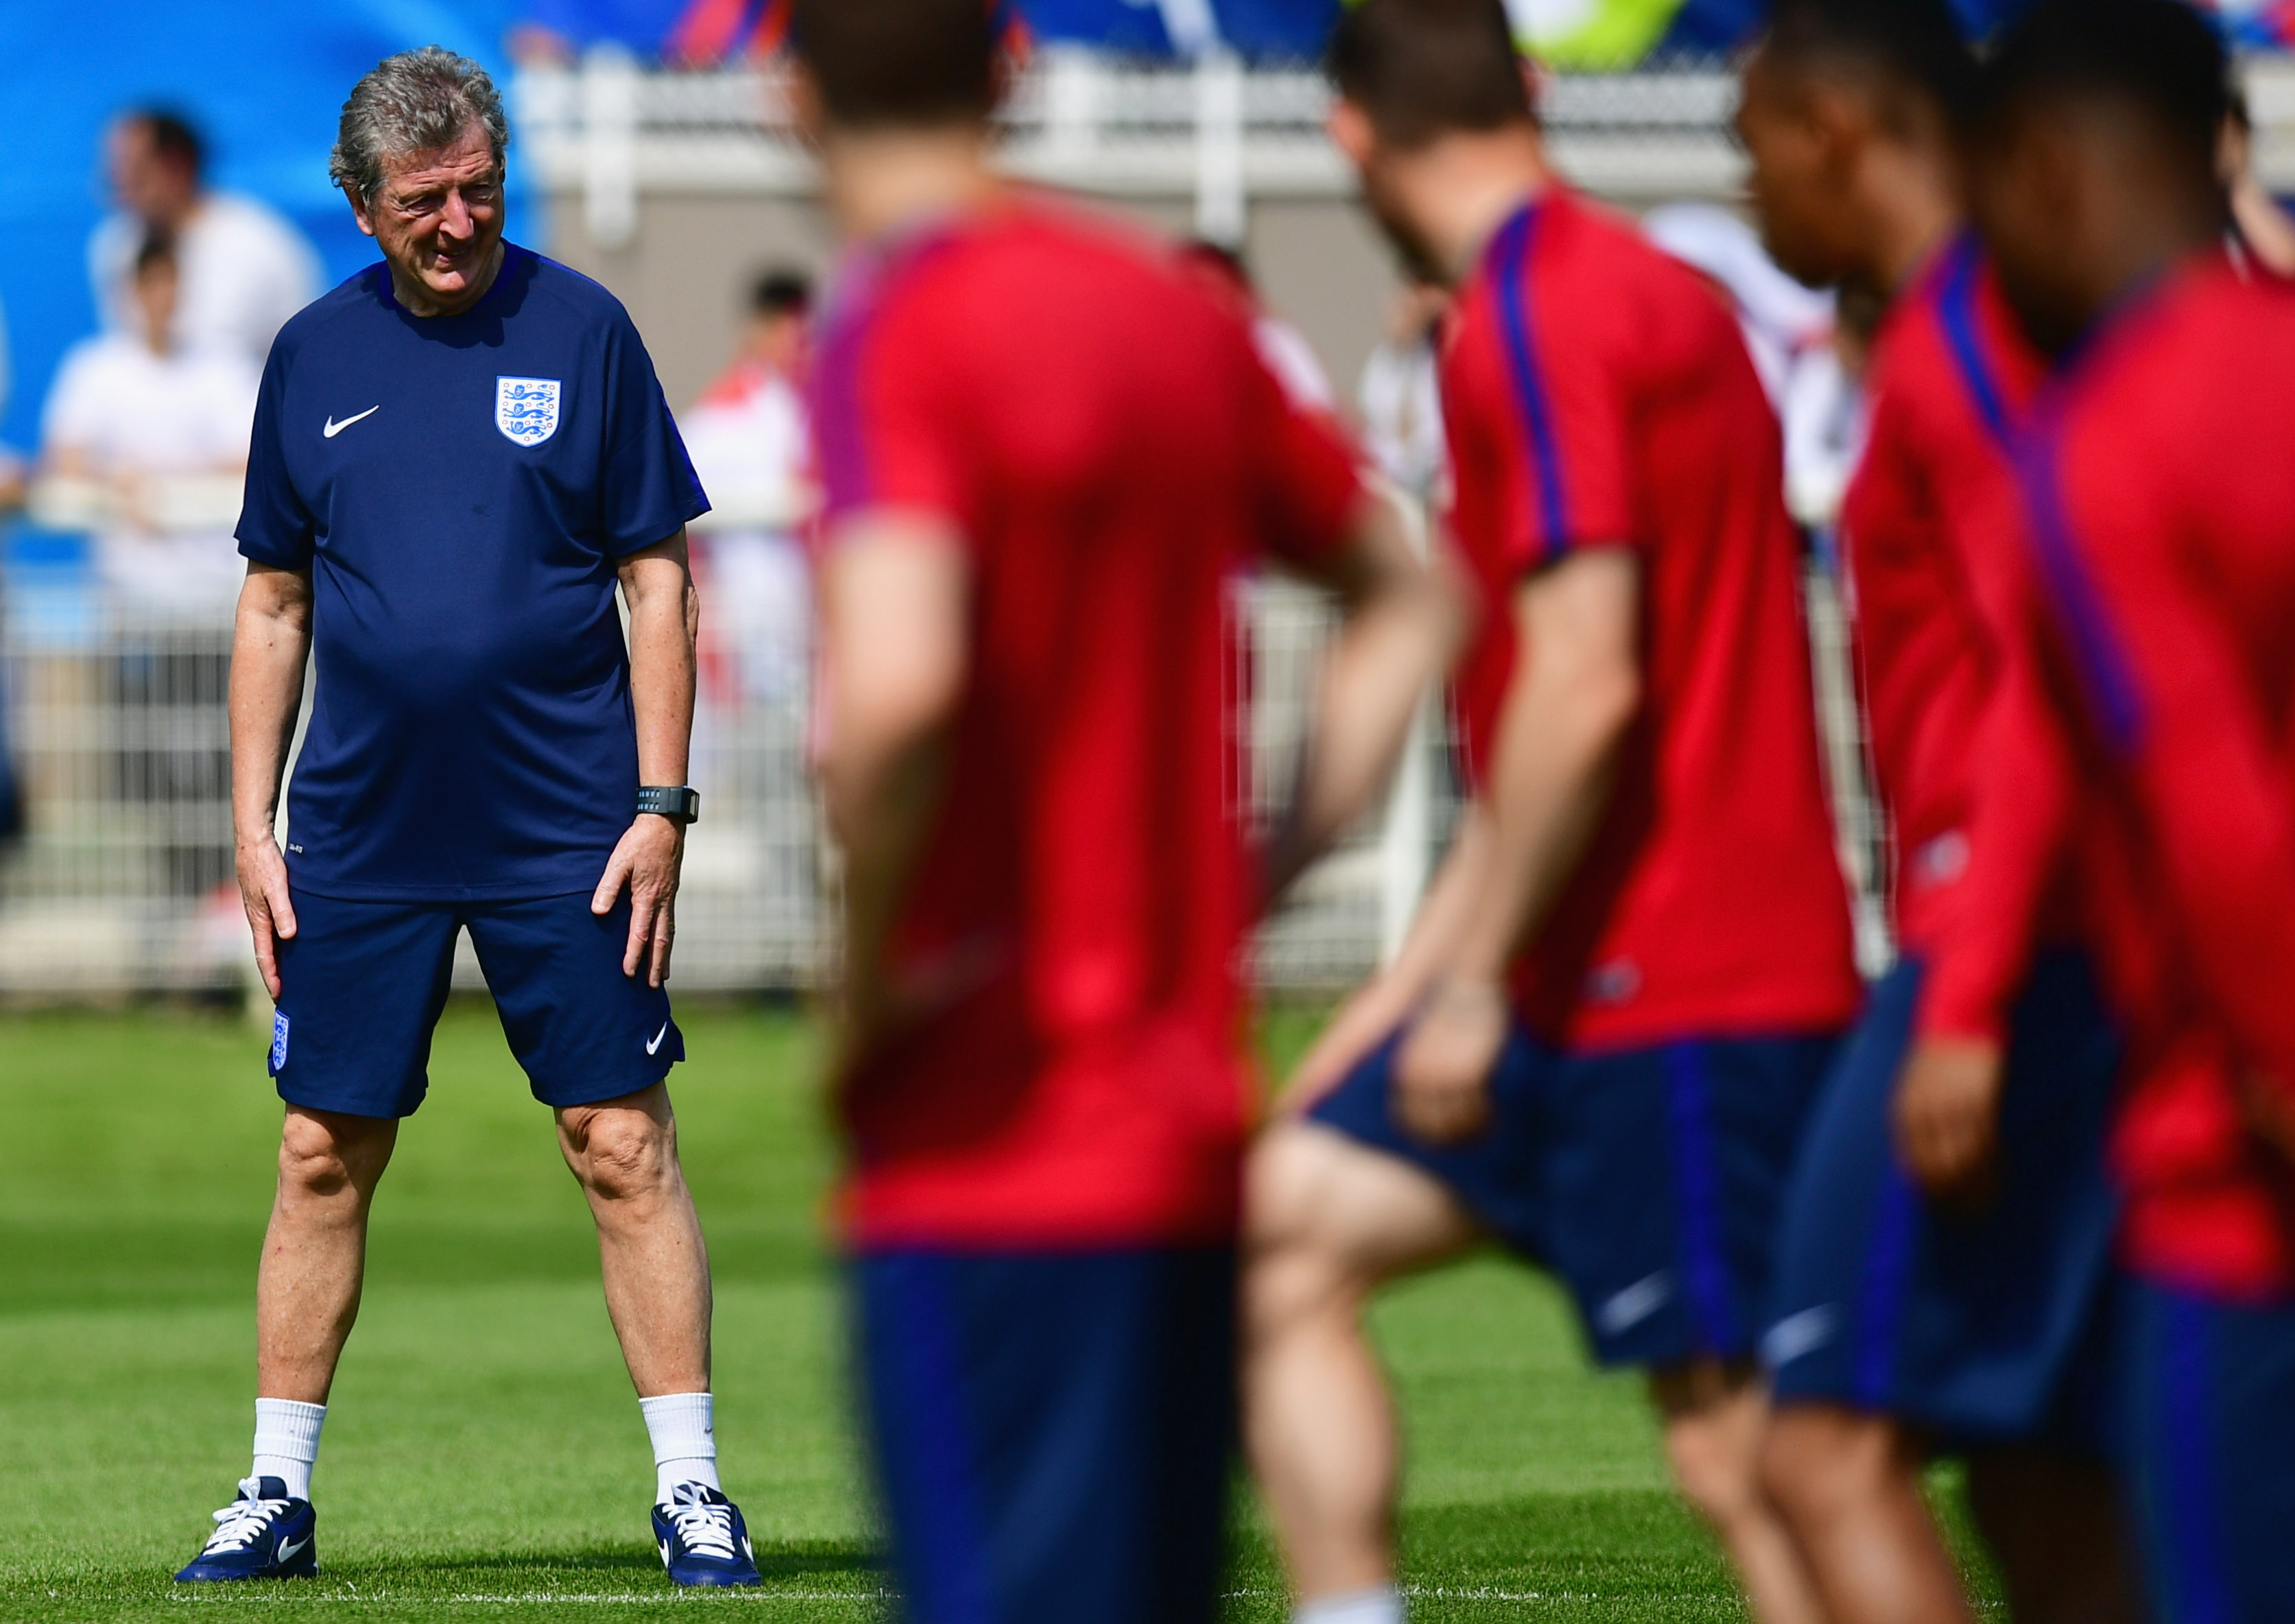 England | Another poor showing begs the question: What troubles the Three Lions?